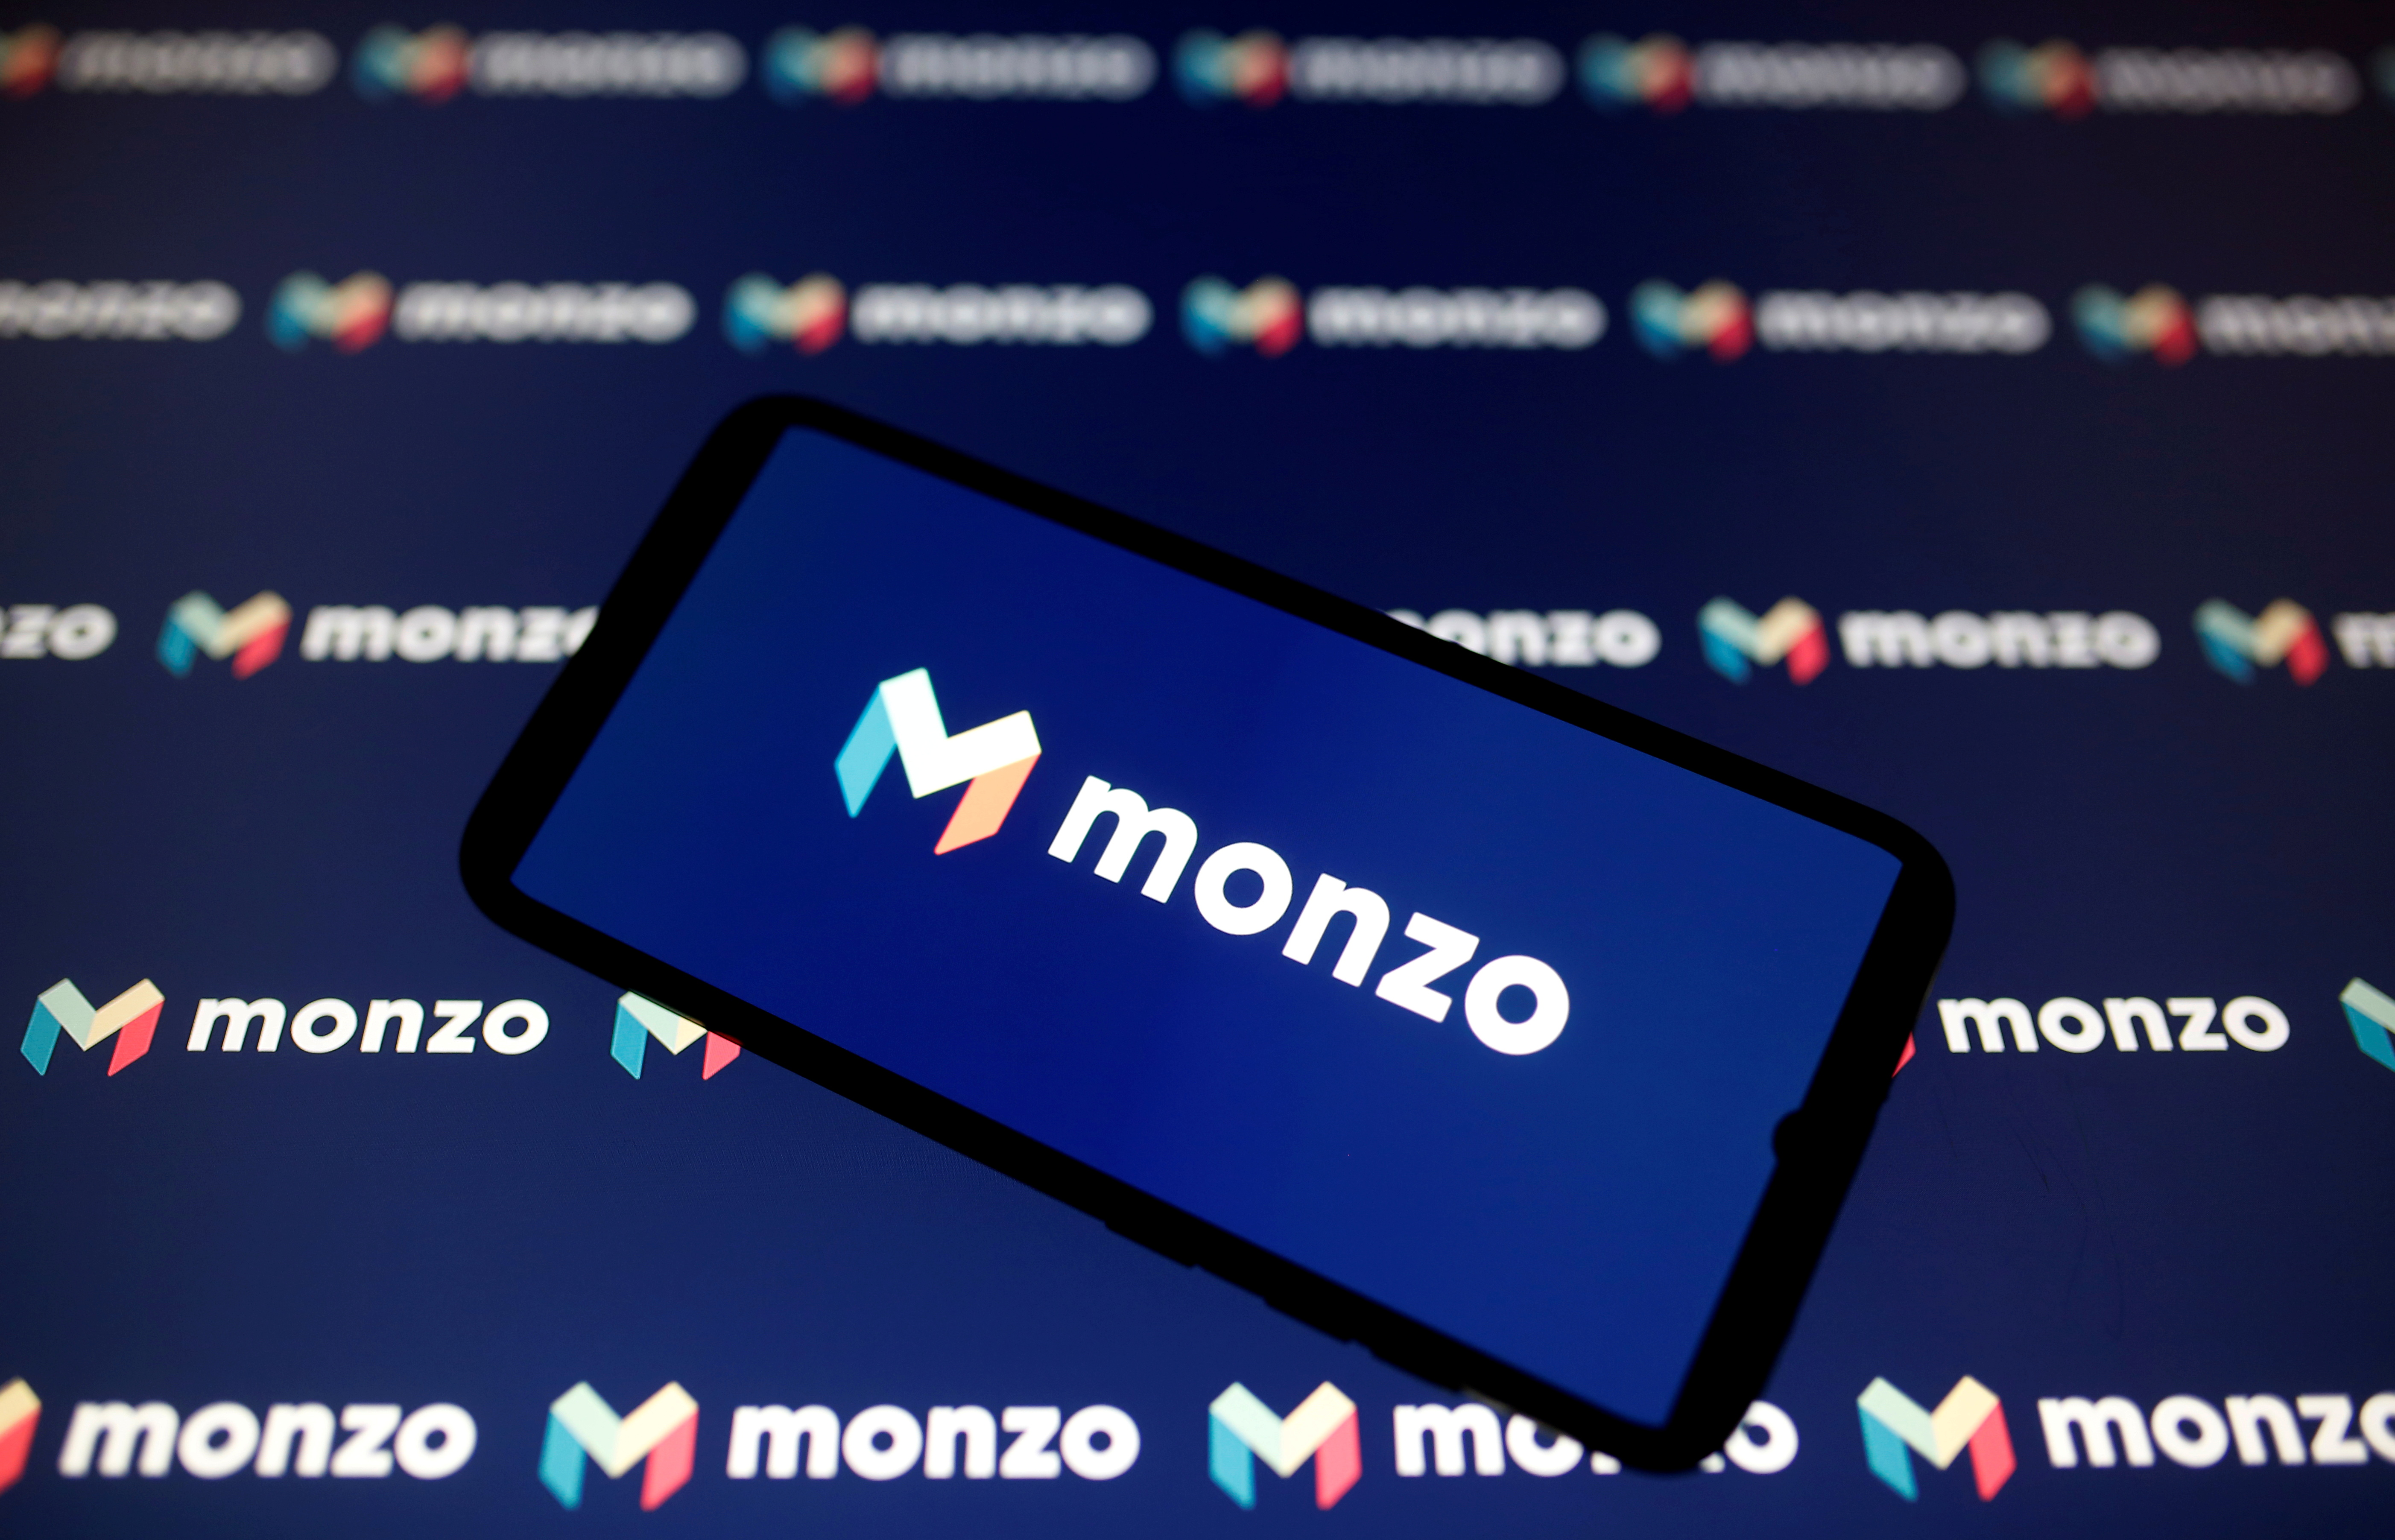 A smartphone displays a Monzo logo in this illustration